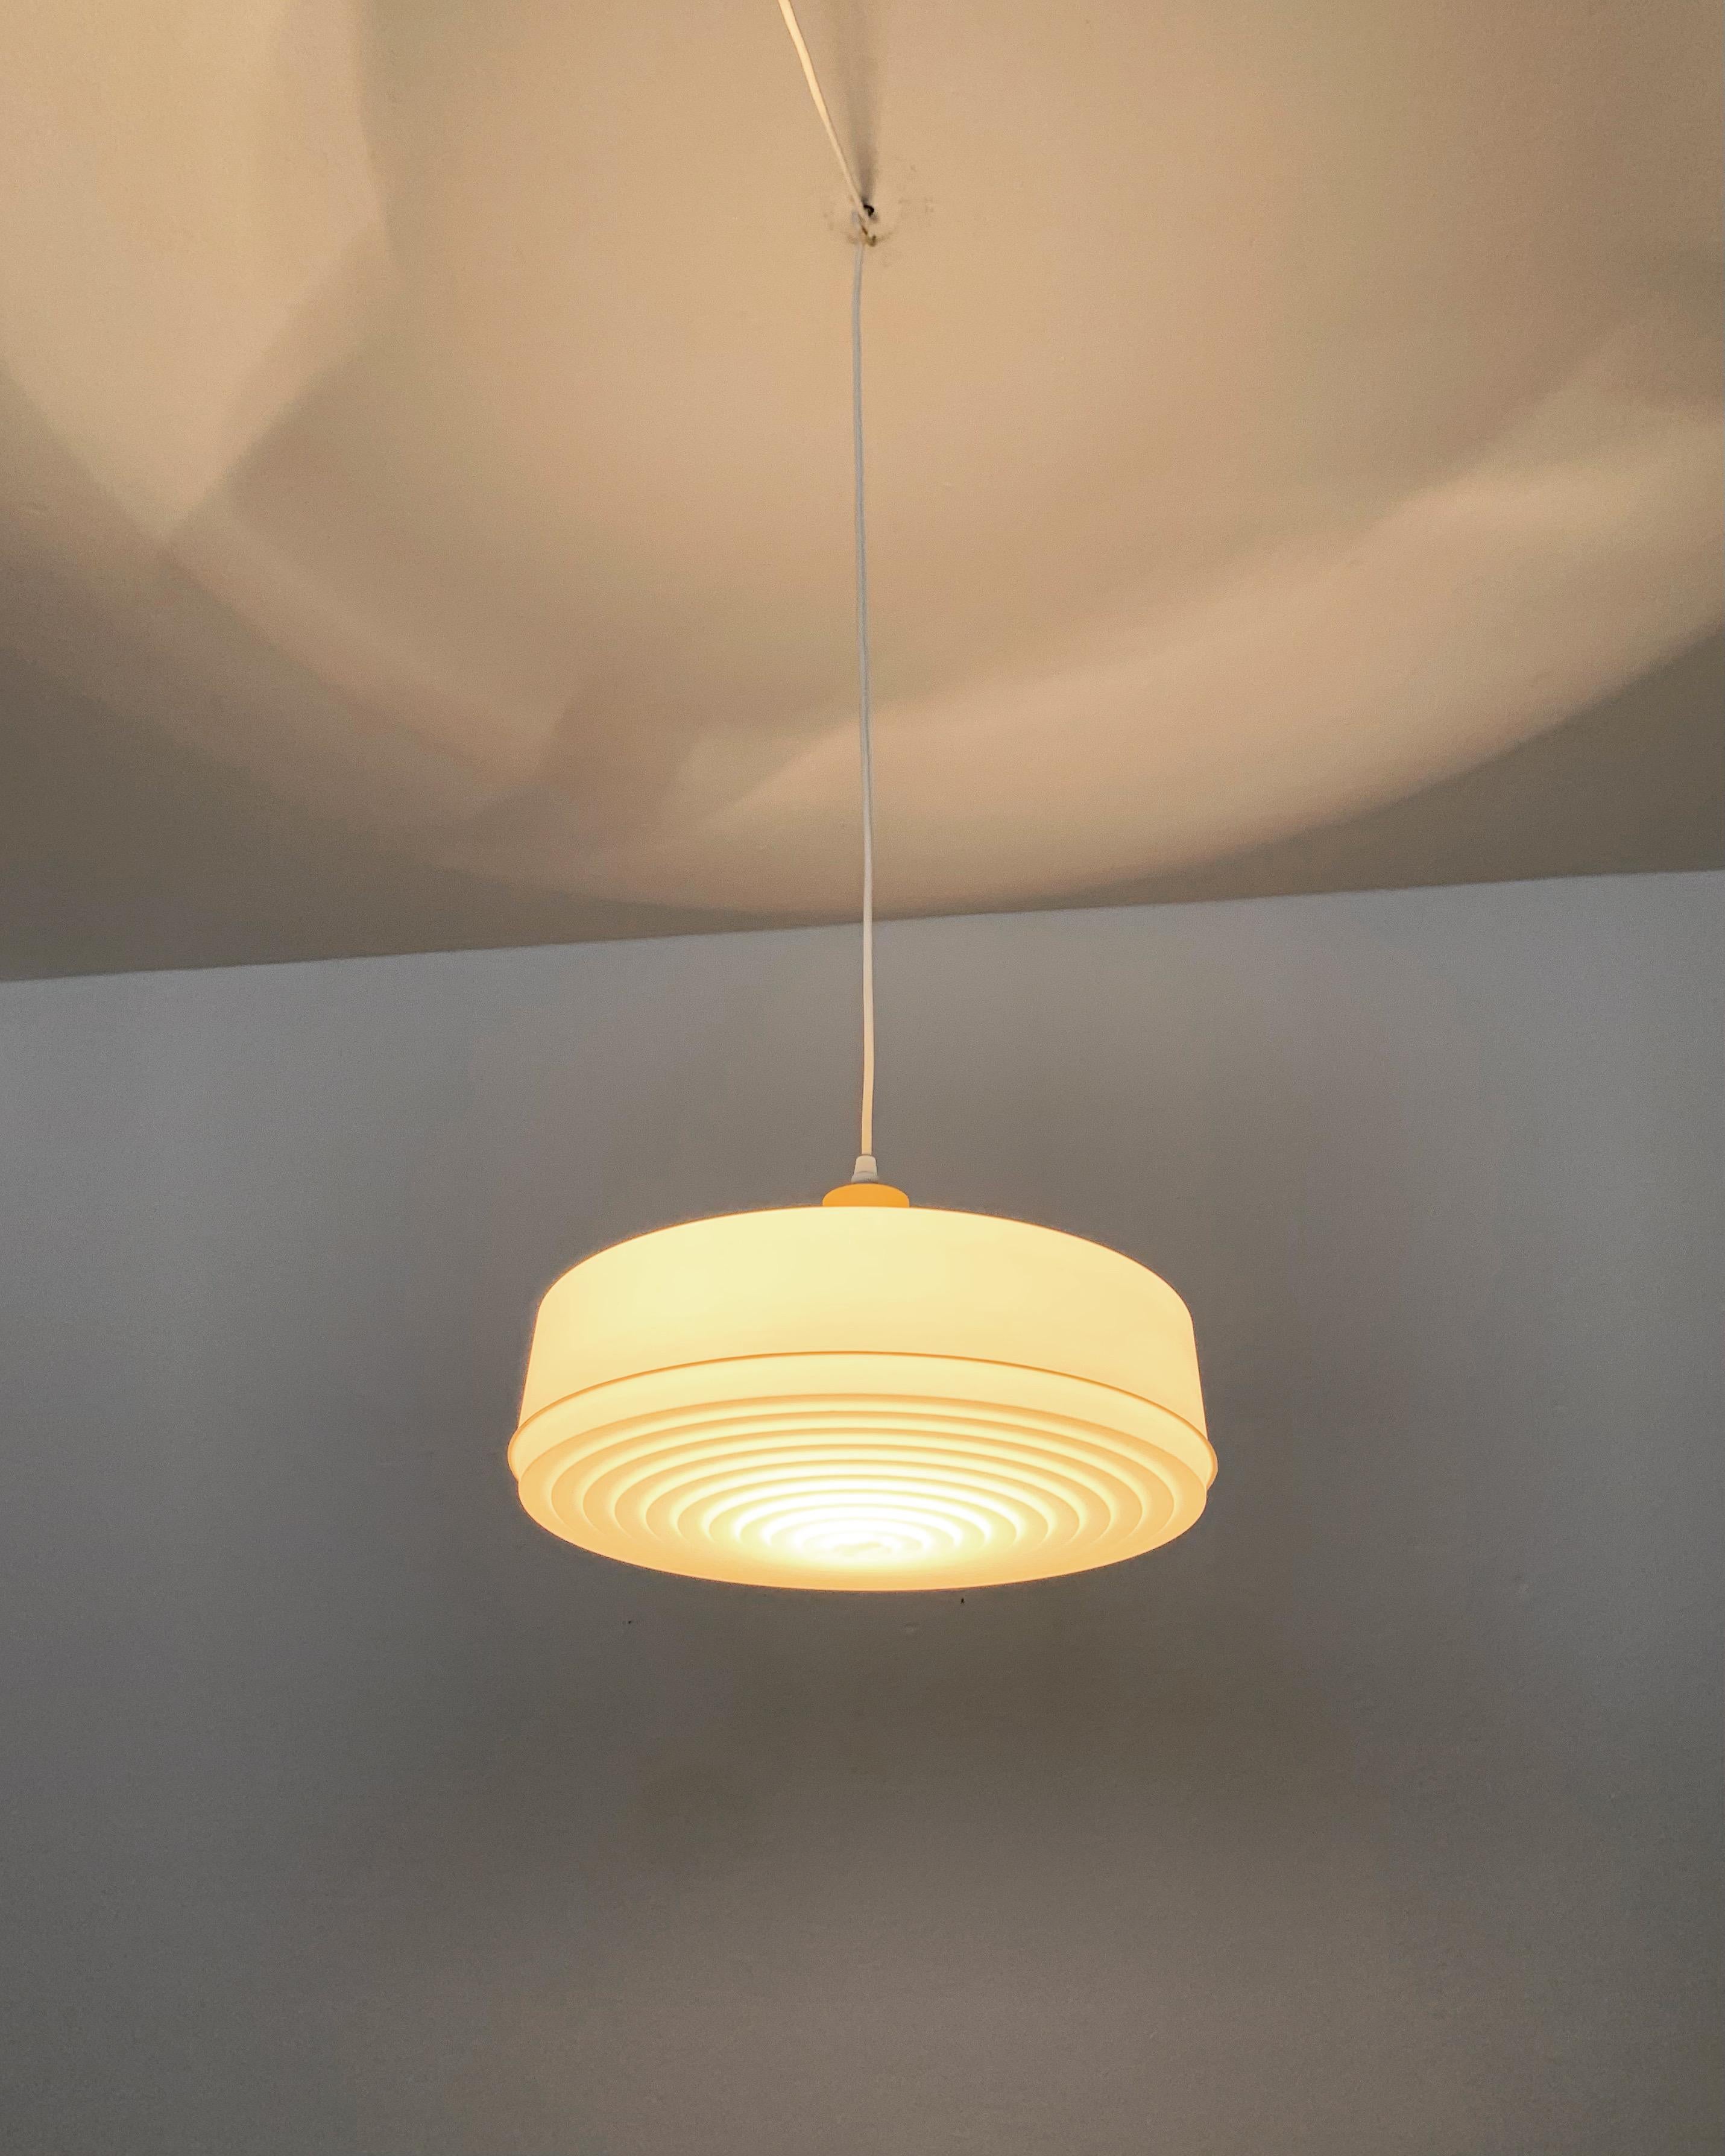 Origami Pendant Lamp by Aloys Gangkofner for Erco For Sale 1